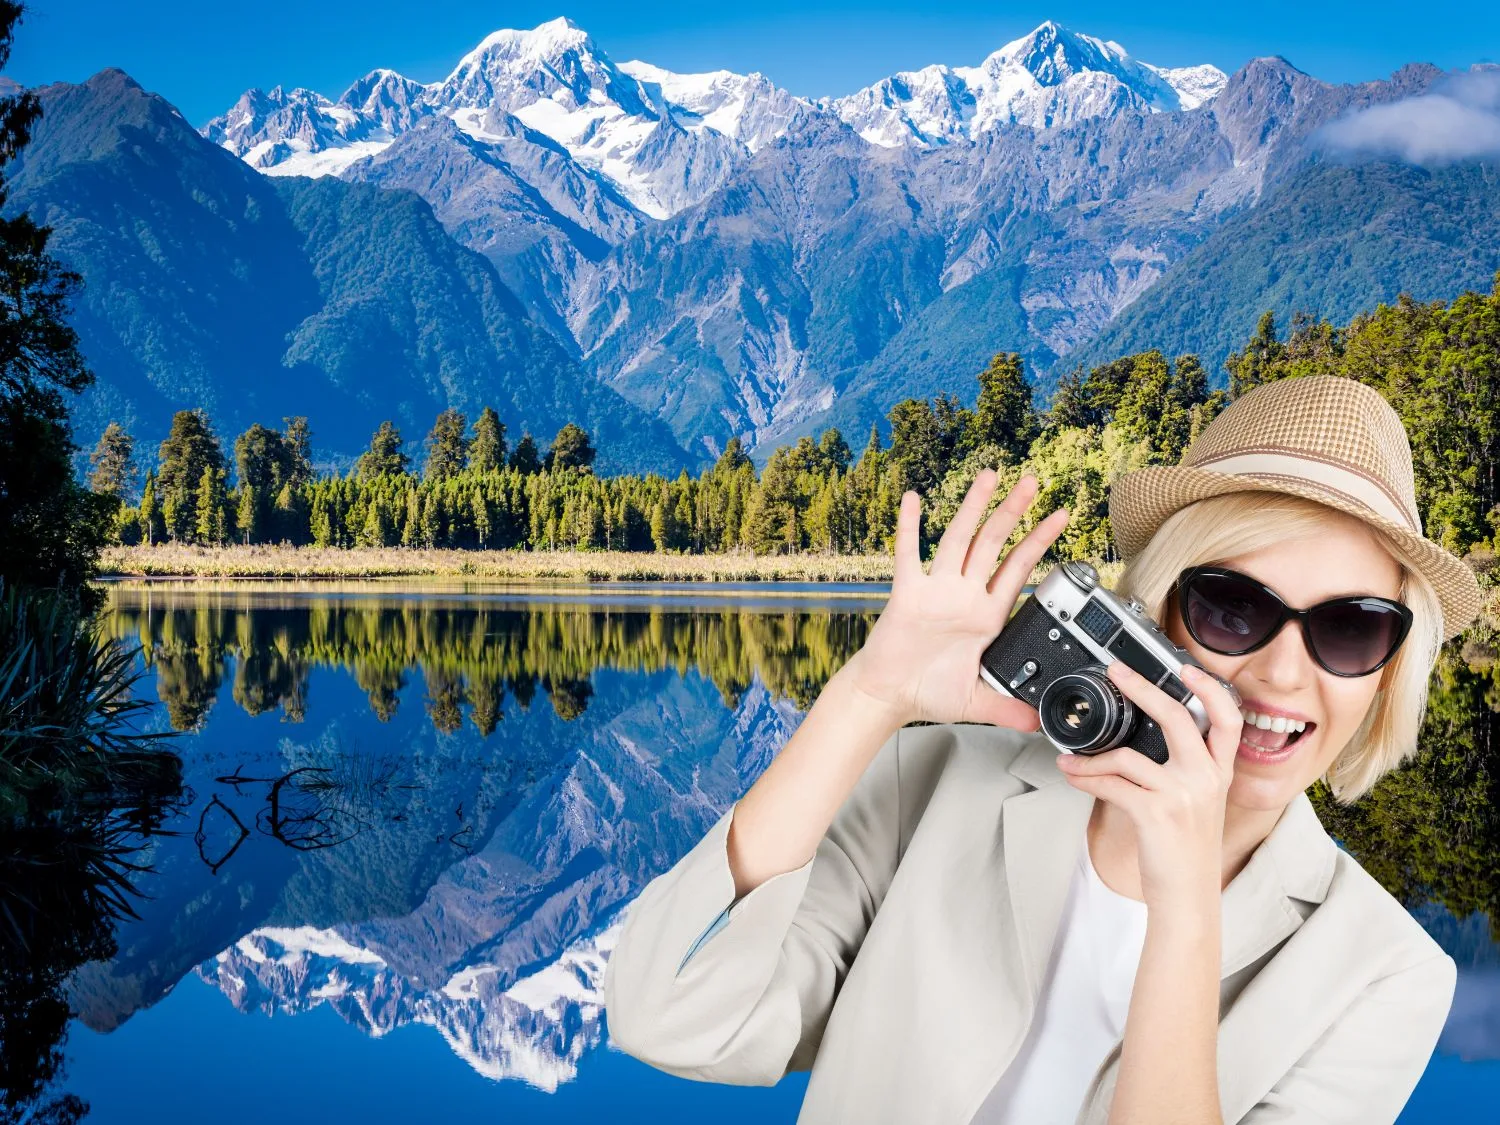 The 7 Best New Zealand Tours For Unforgettable Adventures That Are Achievable & Affordable!